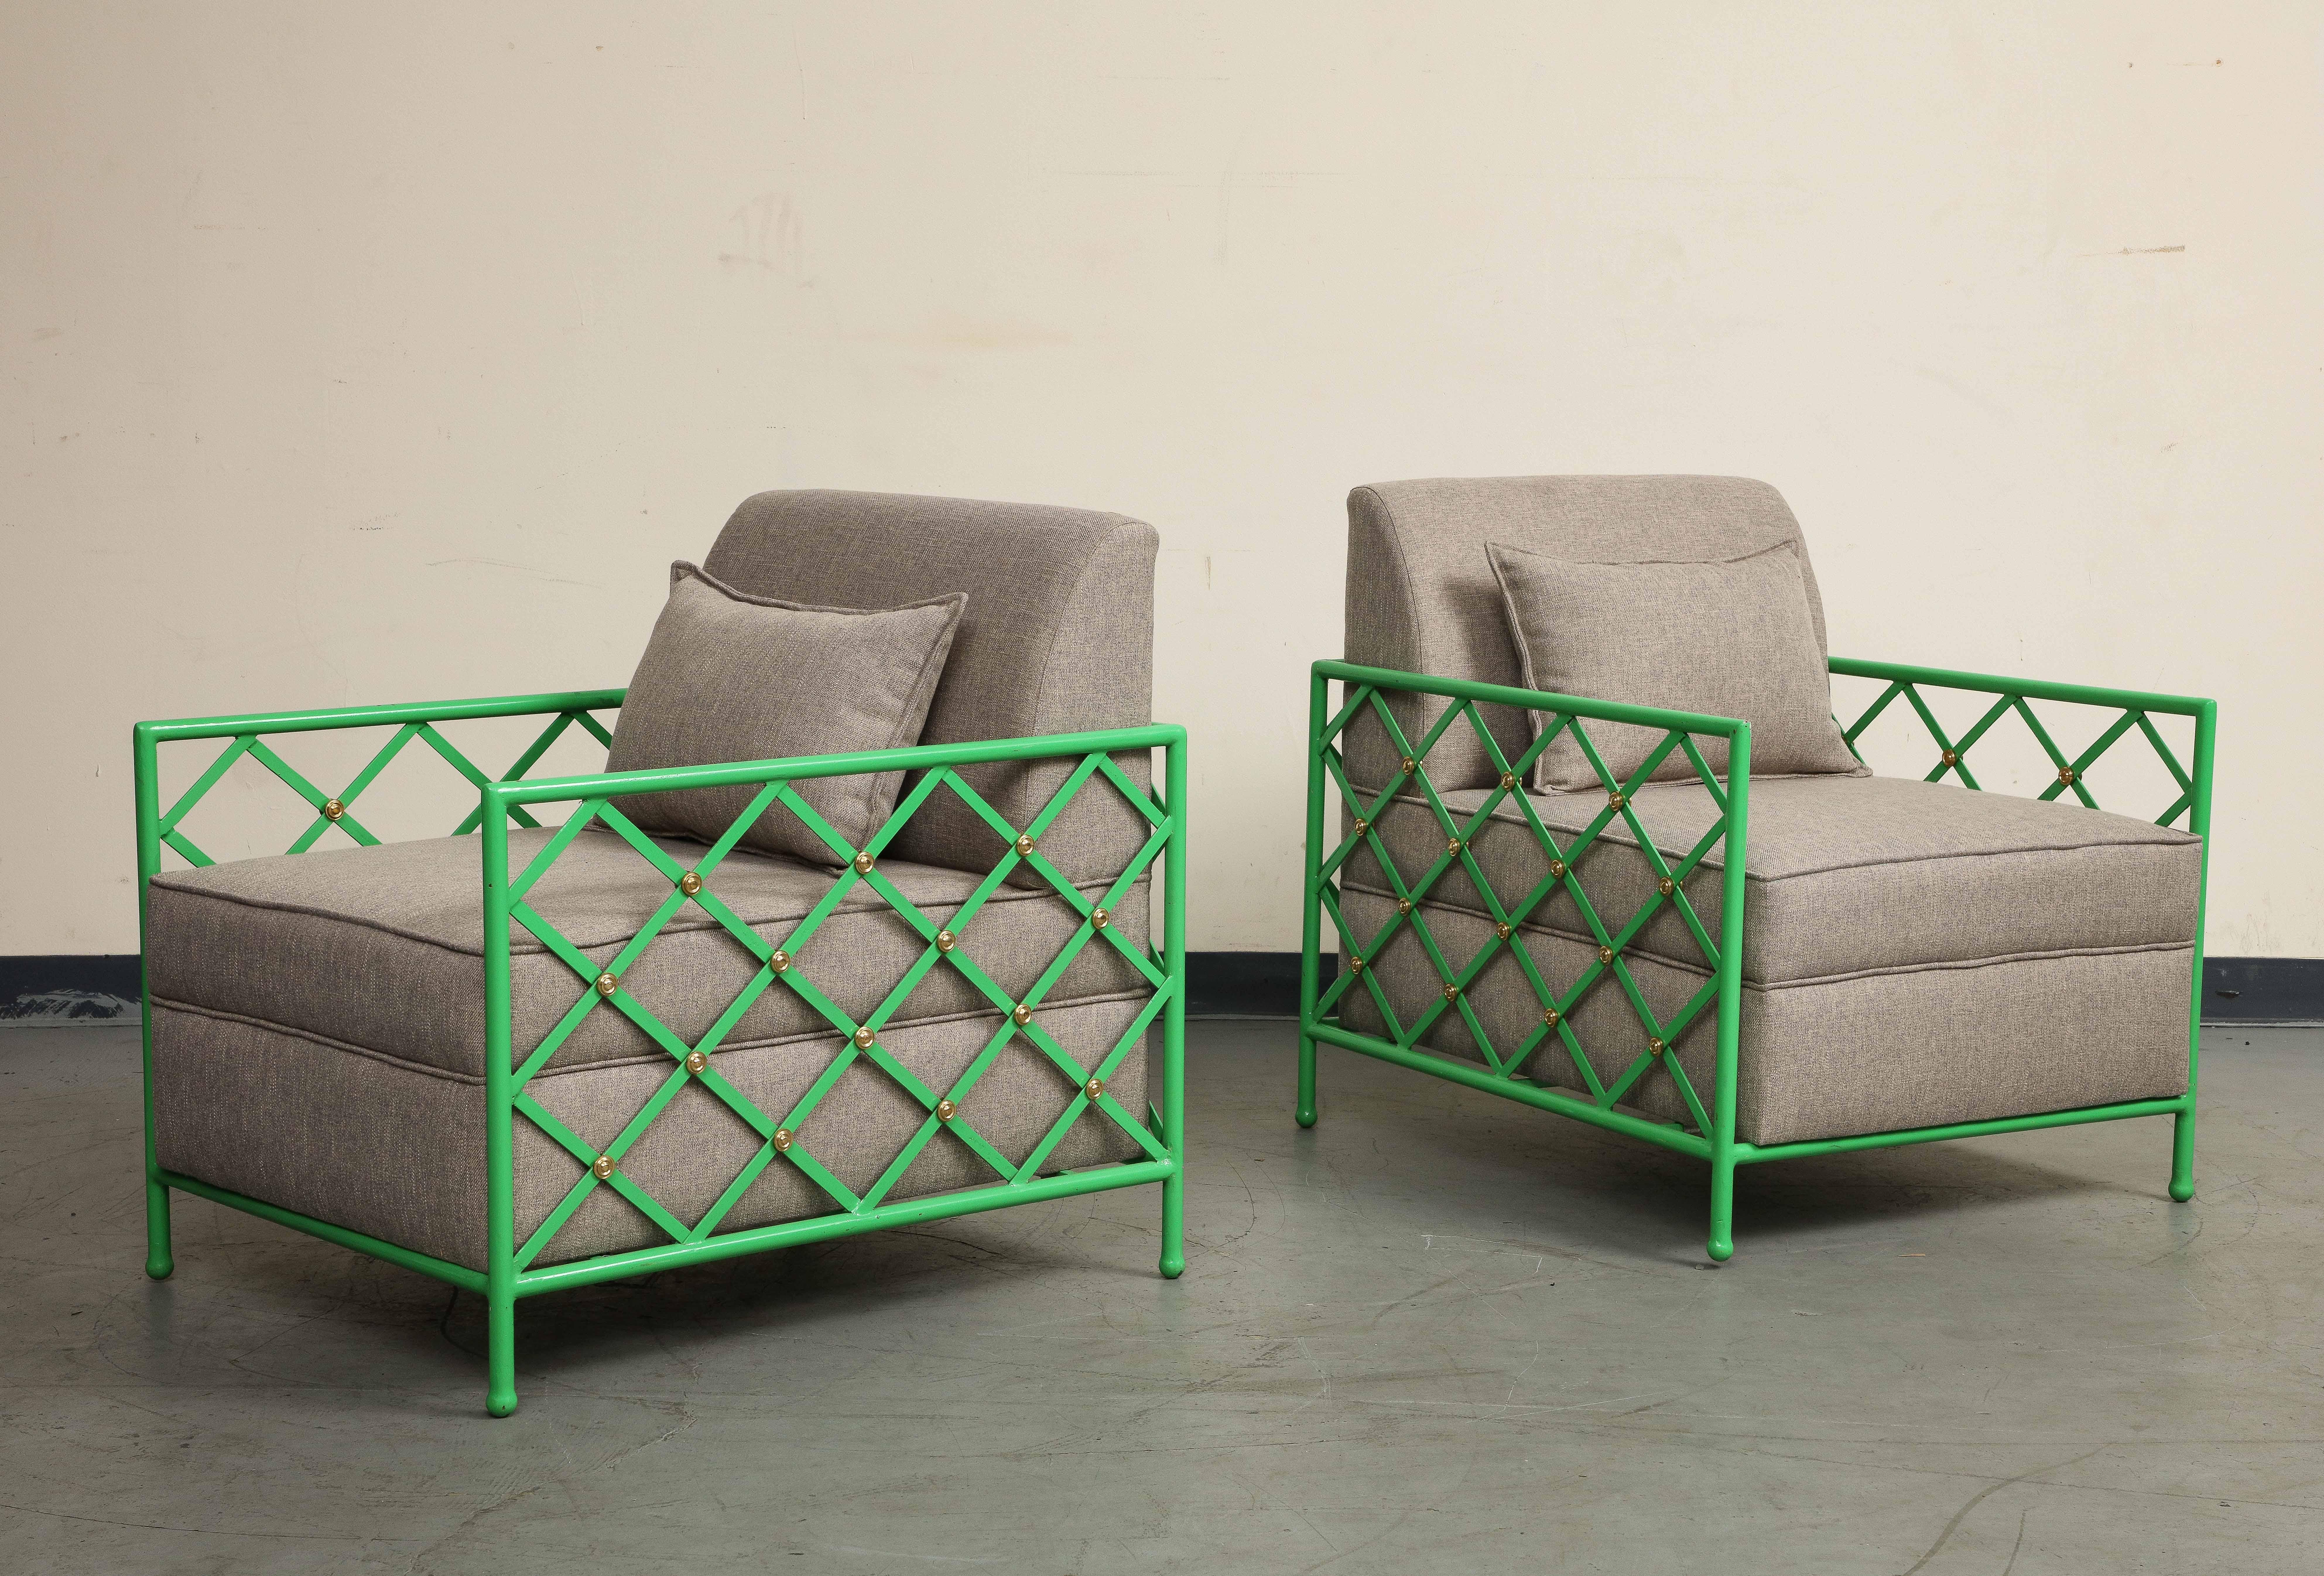 Pair of Midcentury French Style Bright Green Enameled Iron Cube Lounge Chairs In Good Condition For Sale In Chicago, IL